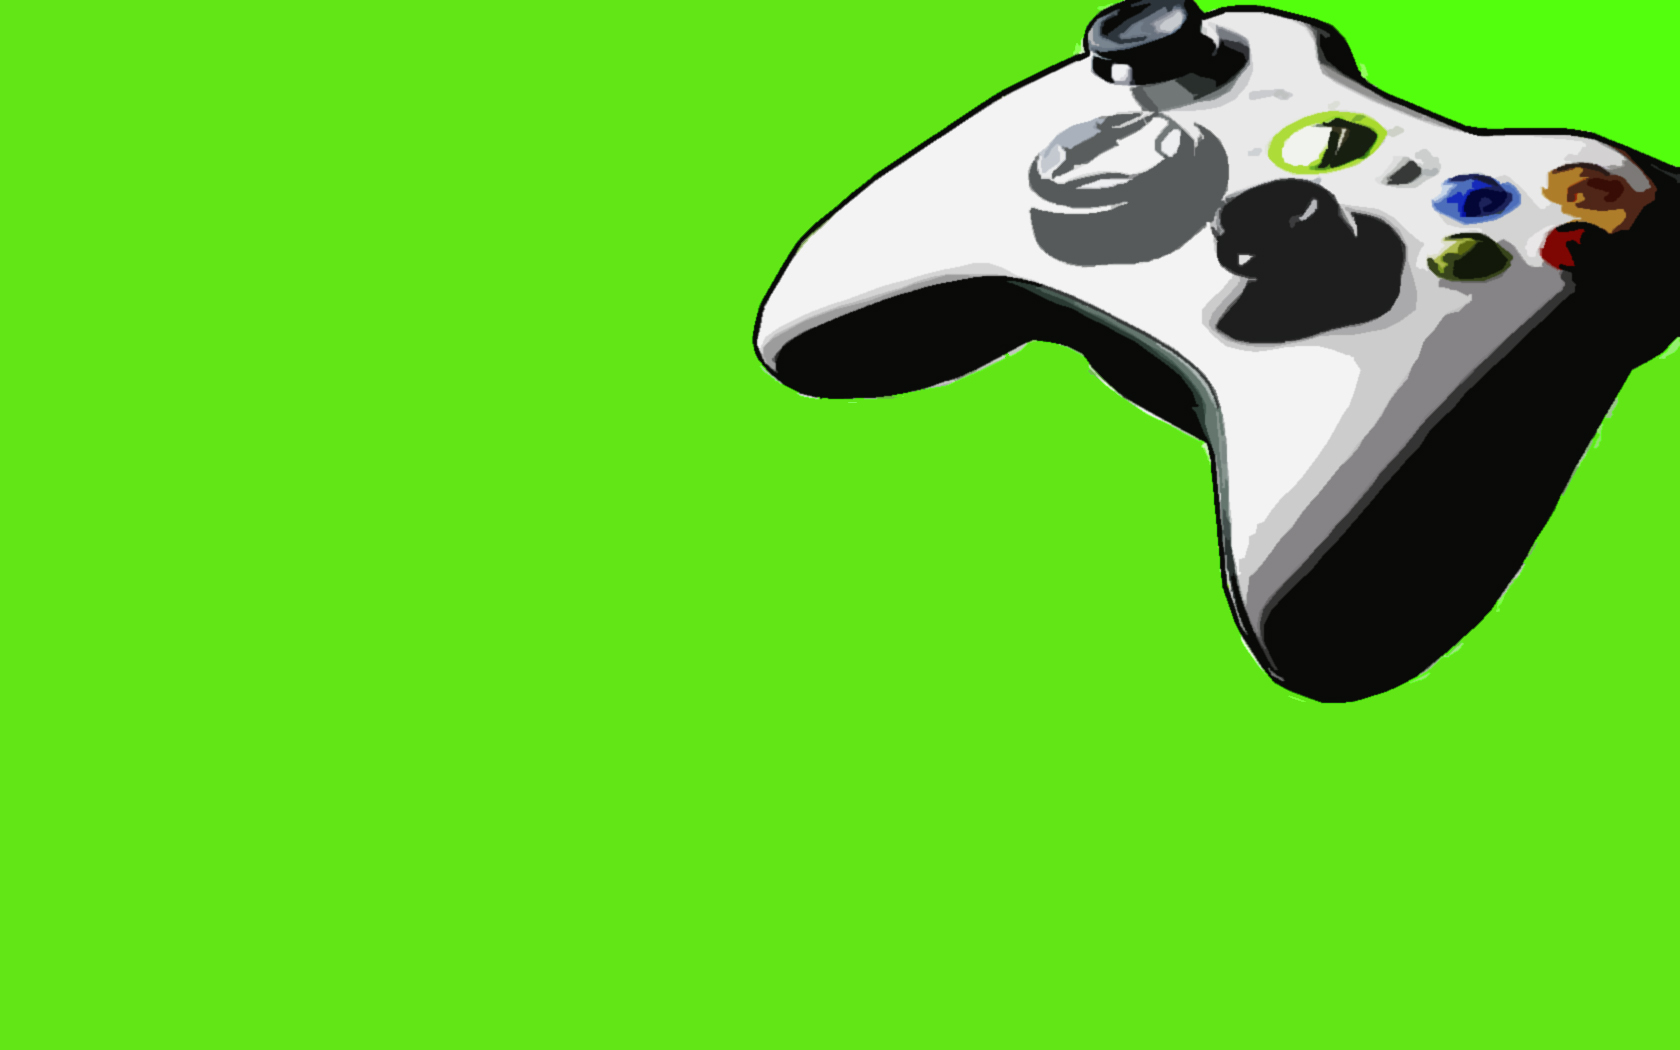 Wallpapers green video games Xbox controllers Xbox simple